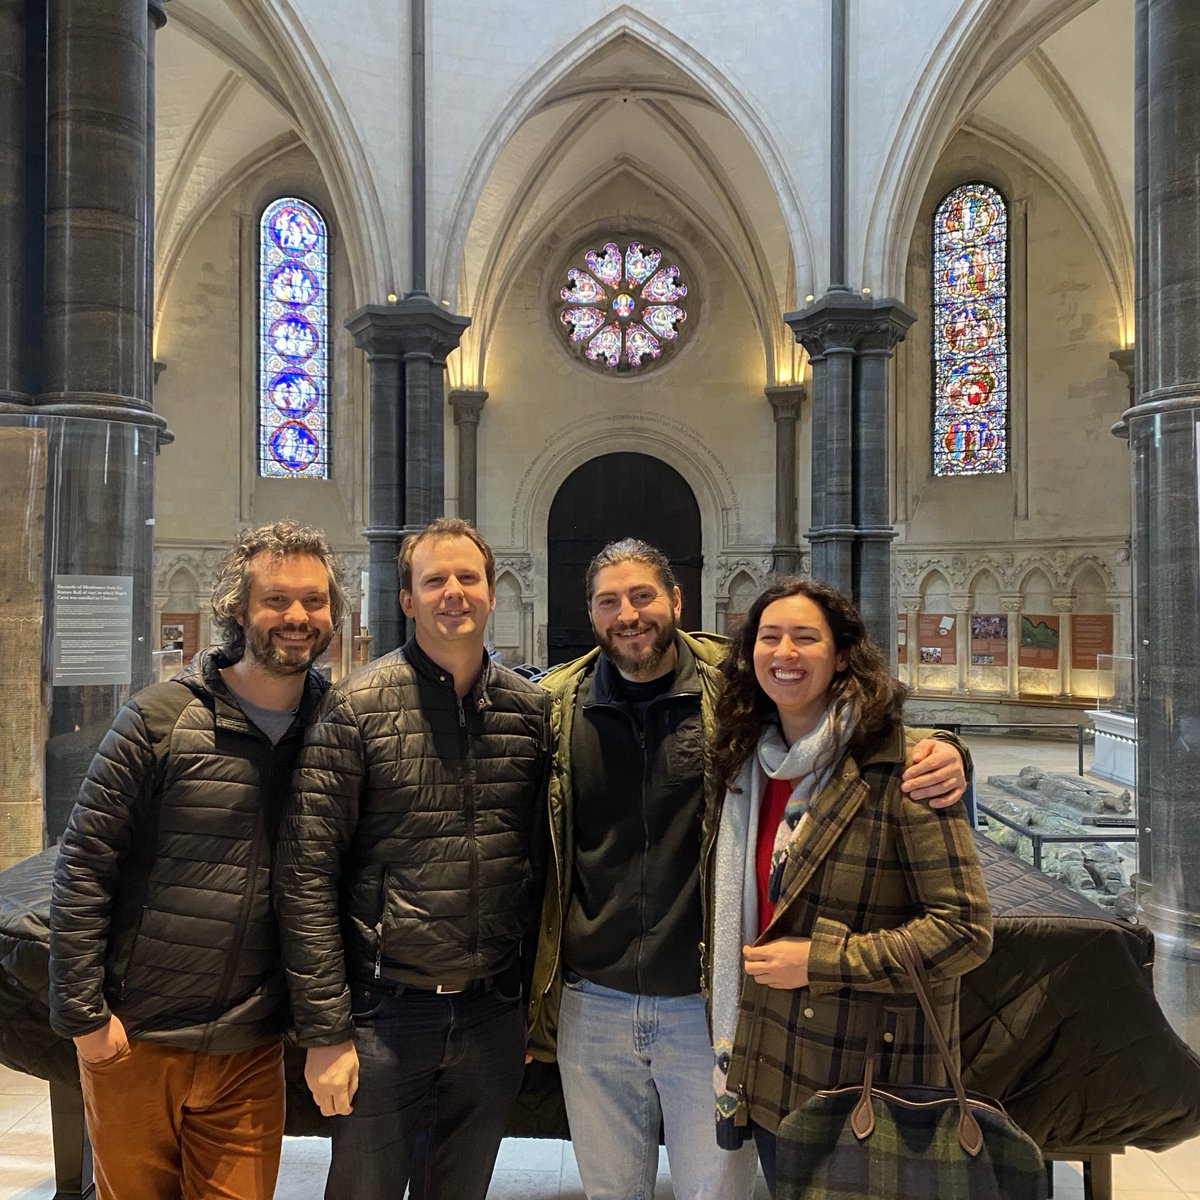 Our lovely string team swung by the church on their lunch break to check out the venue for their Thursday evening concert ‘War & Peace’. Not bad, was the verdict! Jonny Stone | Tim Lowe | Martyn Jackson | Meghan Cassidy @TempleChurchLDN